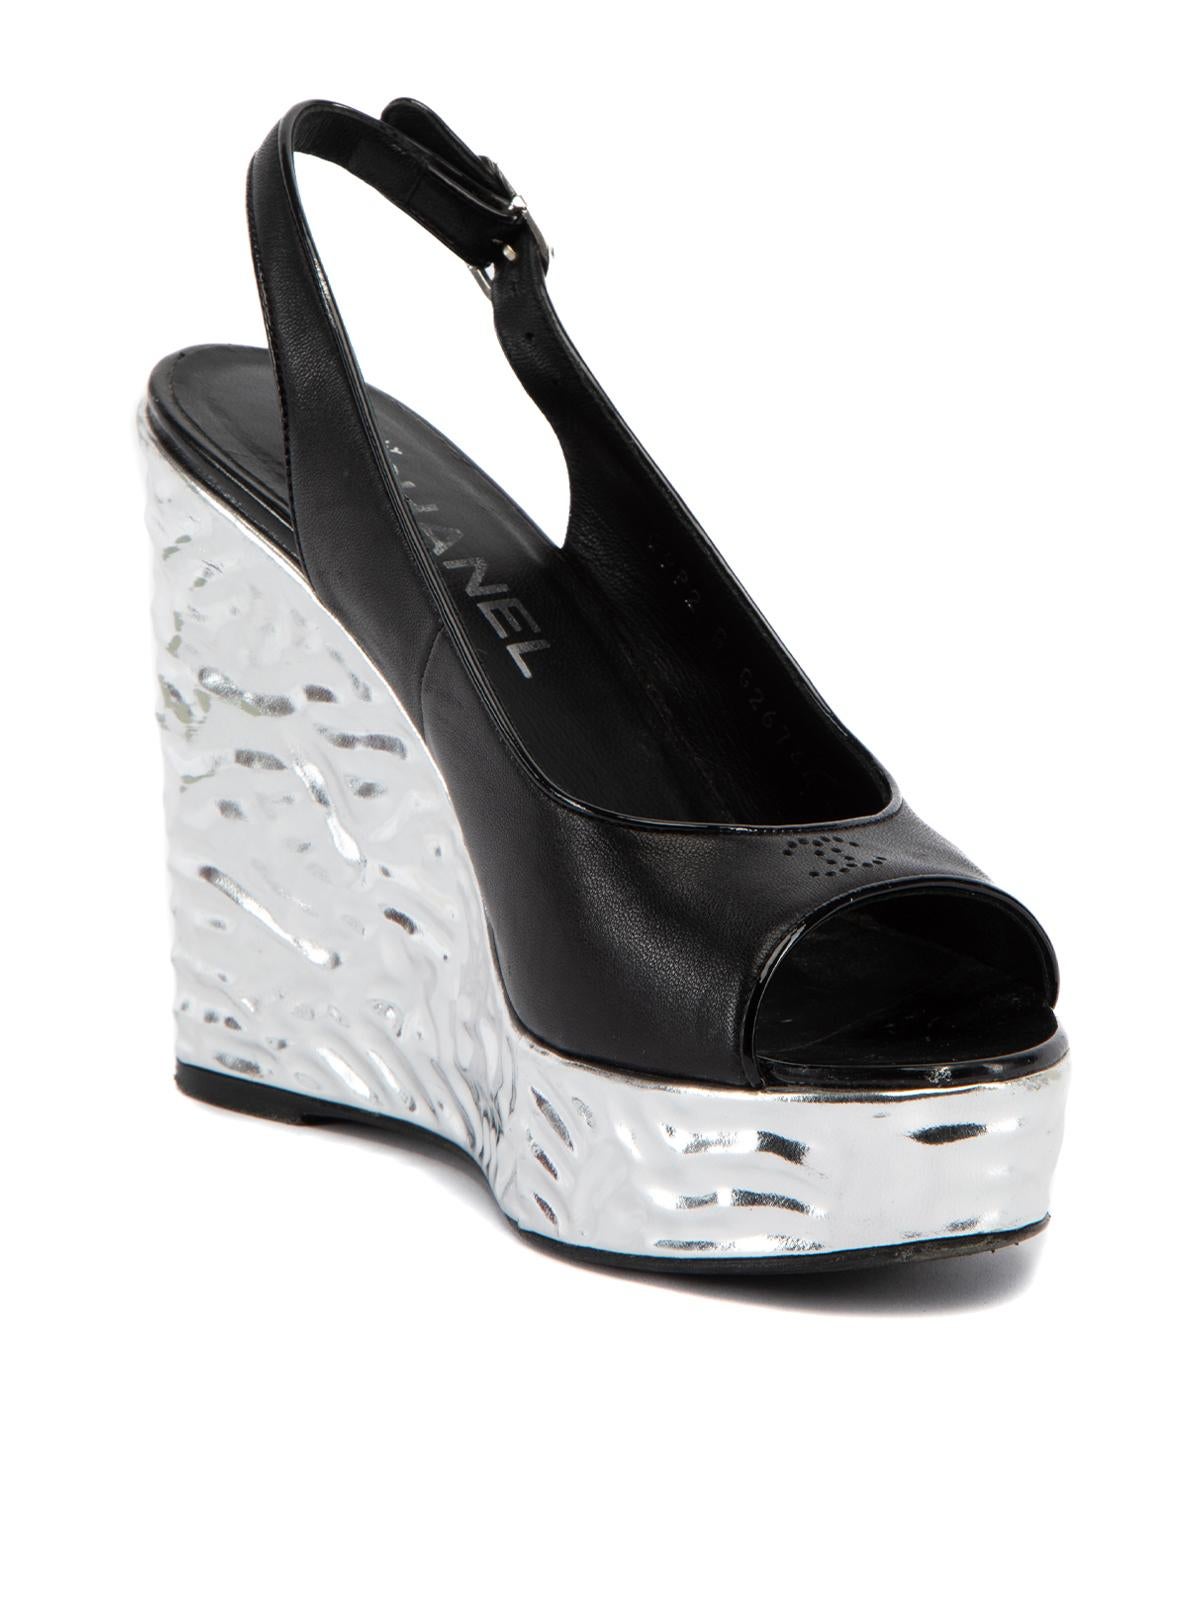 CONDITION is Very good. Minimal wear to heels is evident. Minimal wear to the outsole on this used Chanel designer resale item.   Details  Multicolour- Black and silver Leather  Slingback Peep almond toe Wedge heel Silver metallic scrunch up effect